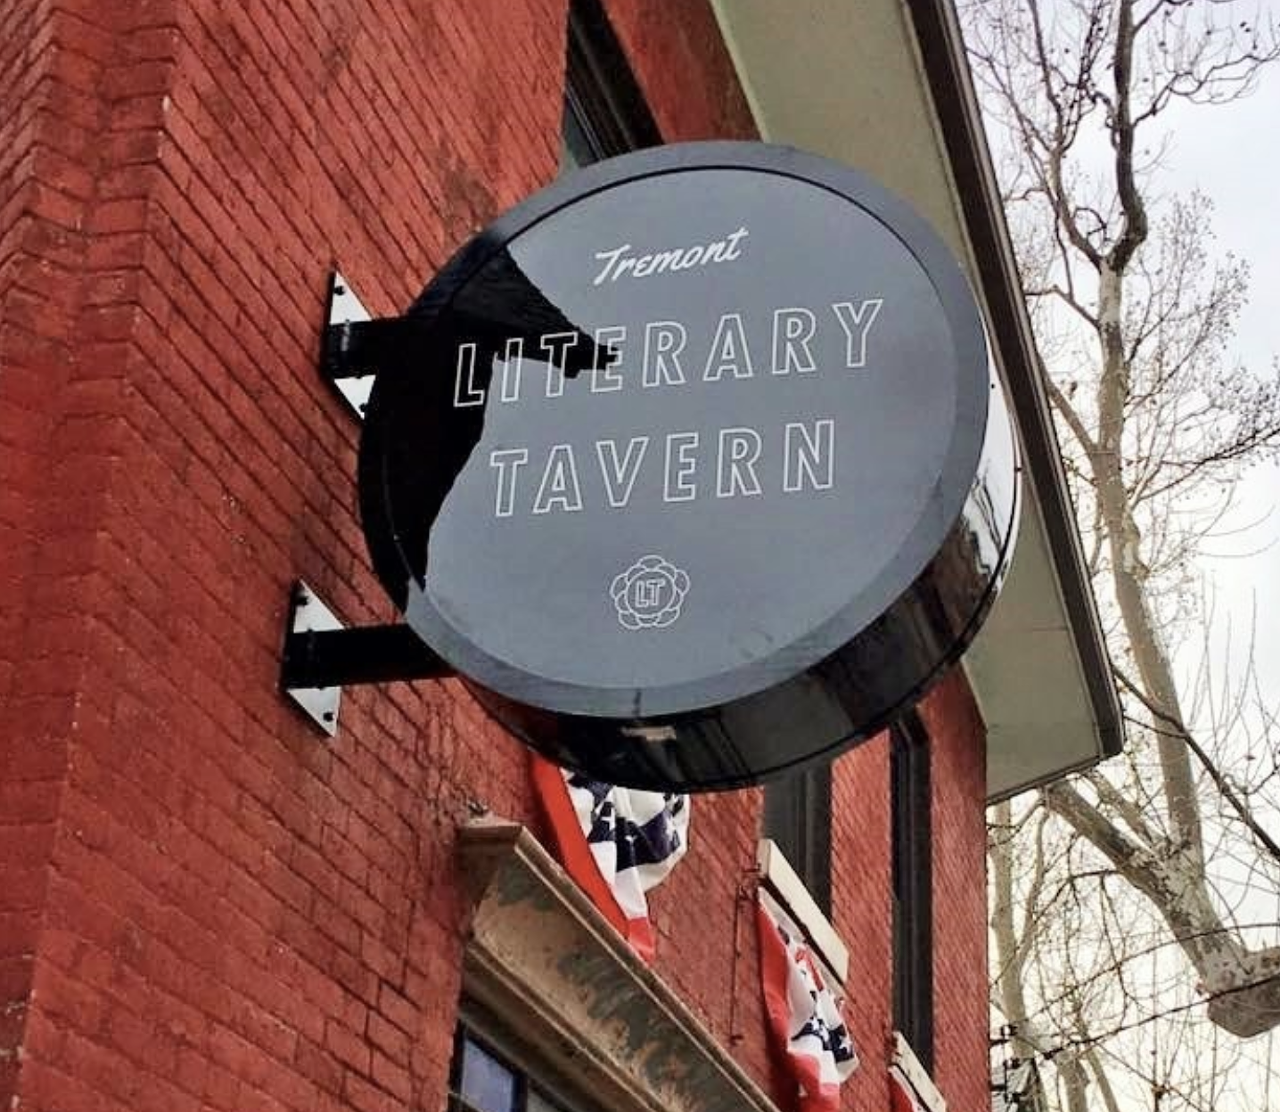  Literary Tavern
1031 Literary Rd., Cleveland 
When Literary Tavern reopened in 2018, owner Ross Valenti’s goal for the old Literary Café in Tremont, was to create a casual, comfortable and relevant place for neighbors to enjoy themselves: essentially, a new-old neighborhood classic and he reached that goal. The kitchen, which serves burgers and small plates, is open until 11 p.m. nightly and midnight on Friday and Saturday.